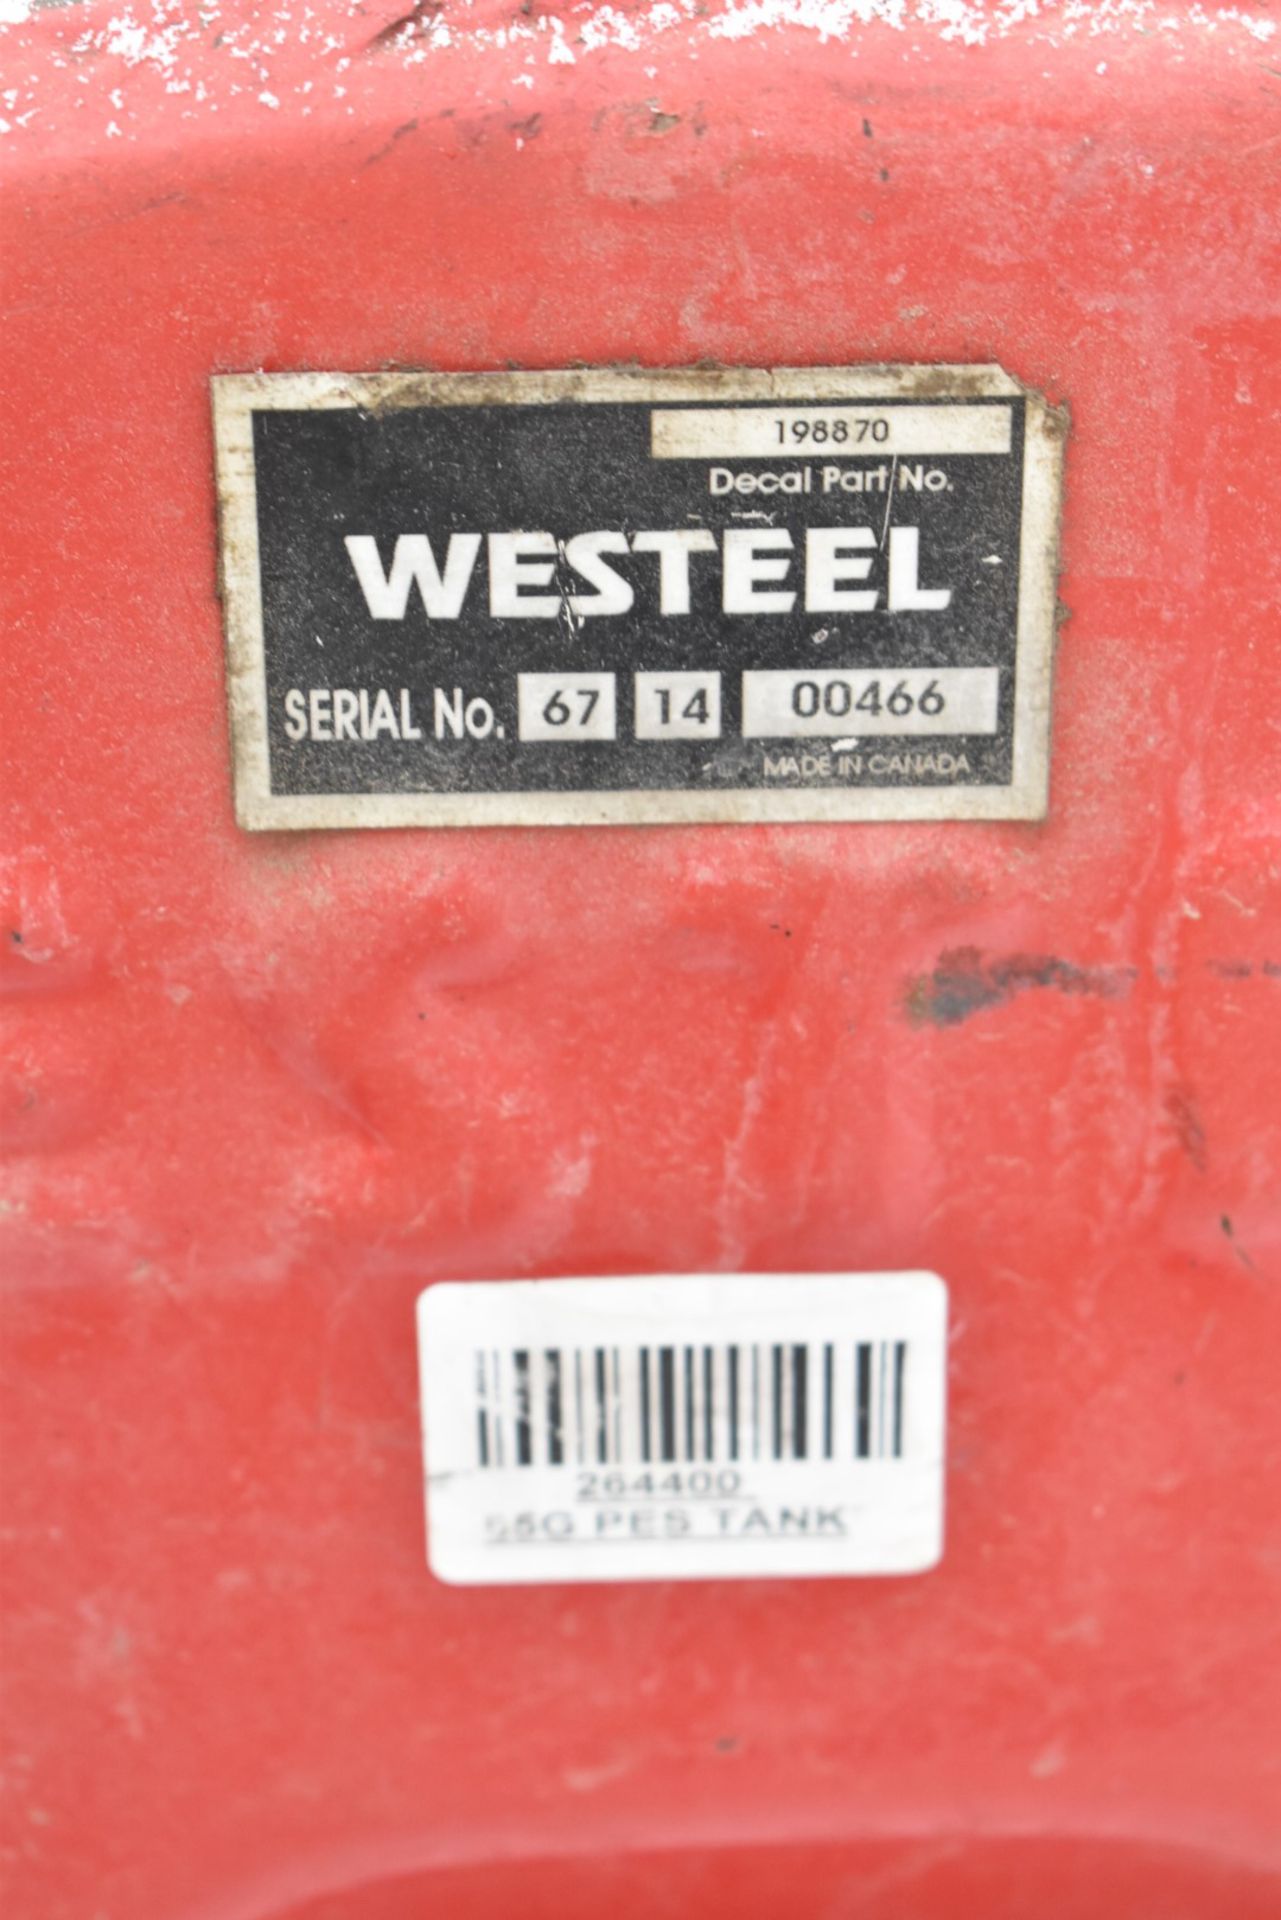 WESTEEL 200L CAPACITY PORTABLE SERVICE FUEL TANK WITH EXPLOSION-PROOF PUMP AND GUN, S/N: 67 14 - Image 5 of 5